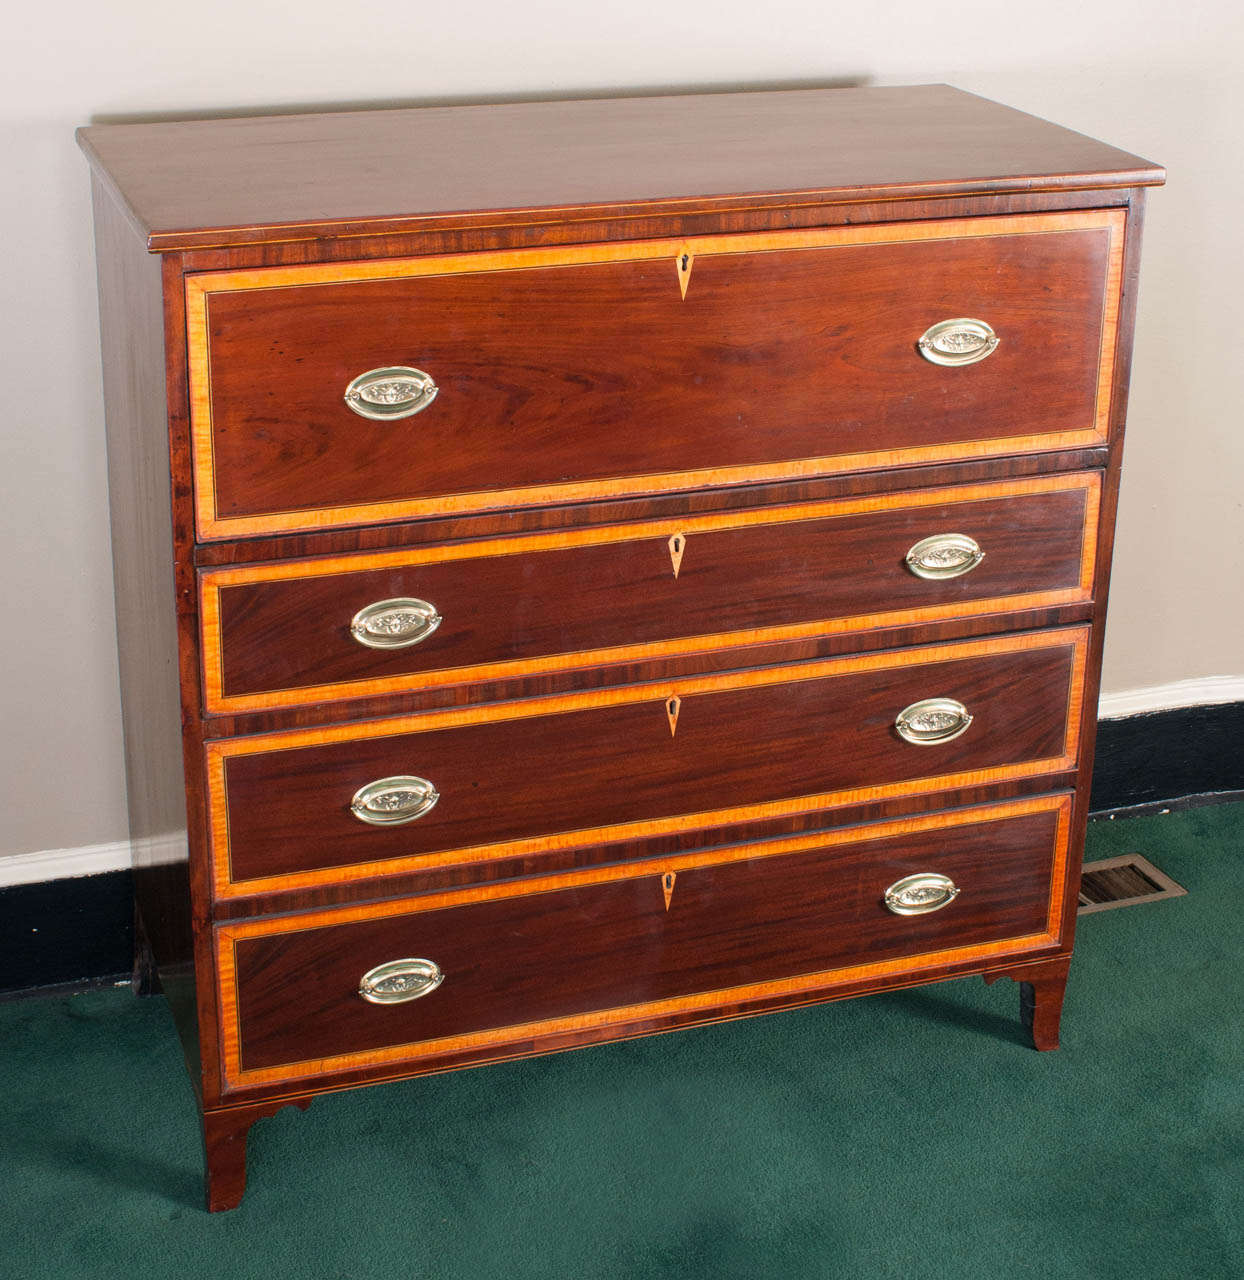 This Hepplewhite piece was probably made in the Mid-Atlantic (Northwestern Virginia or Maryland). It has a beautiful fitted interior pull-out desk section over three graduated chest drawers. The desk has a French Polish which gives a lustrous glow